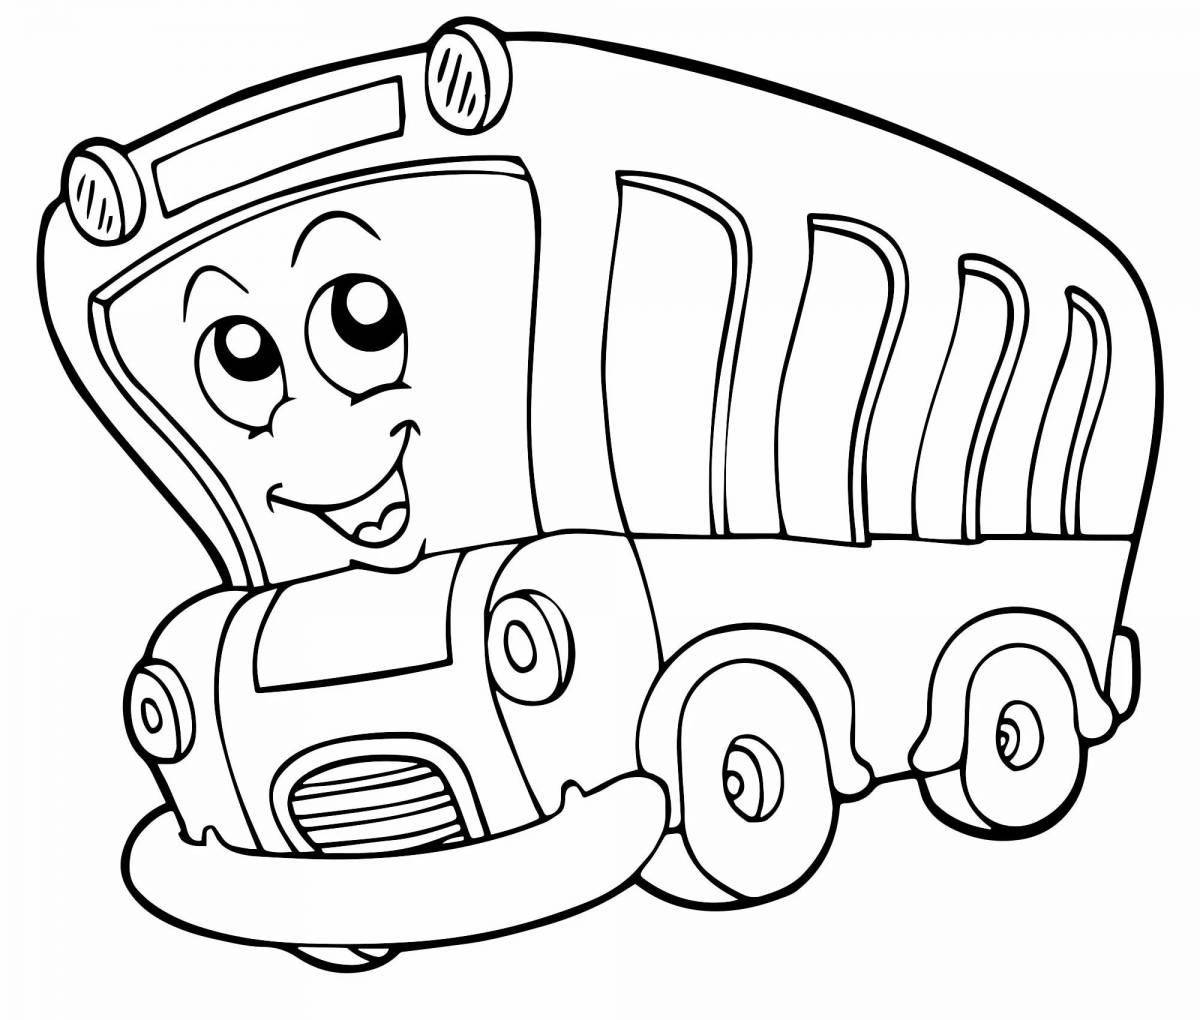 Adorable cars and buses coloring page